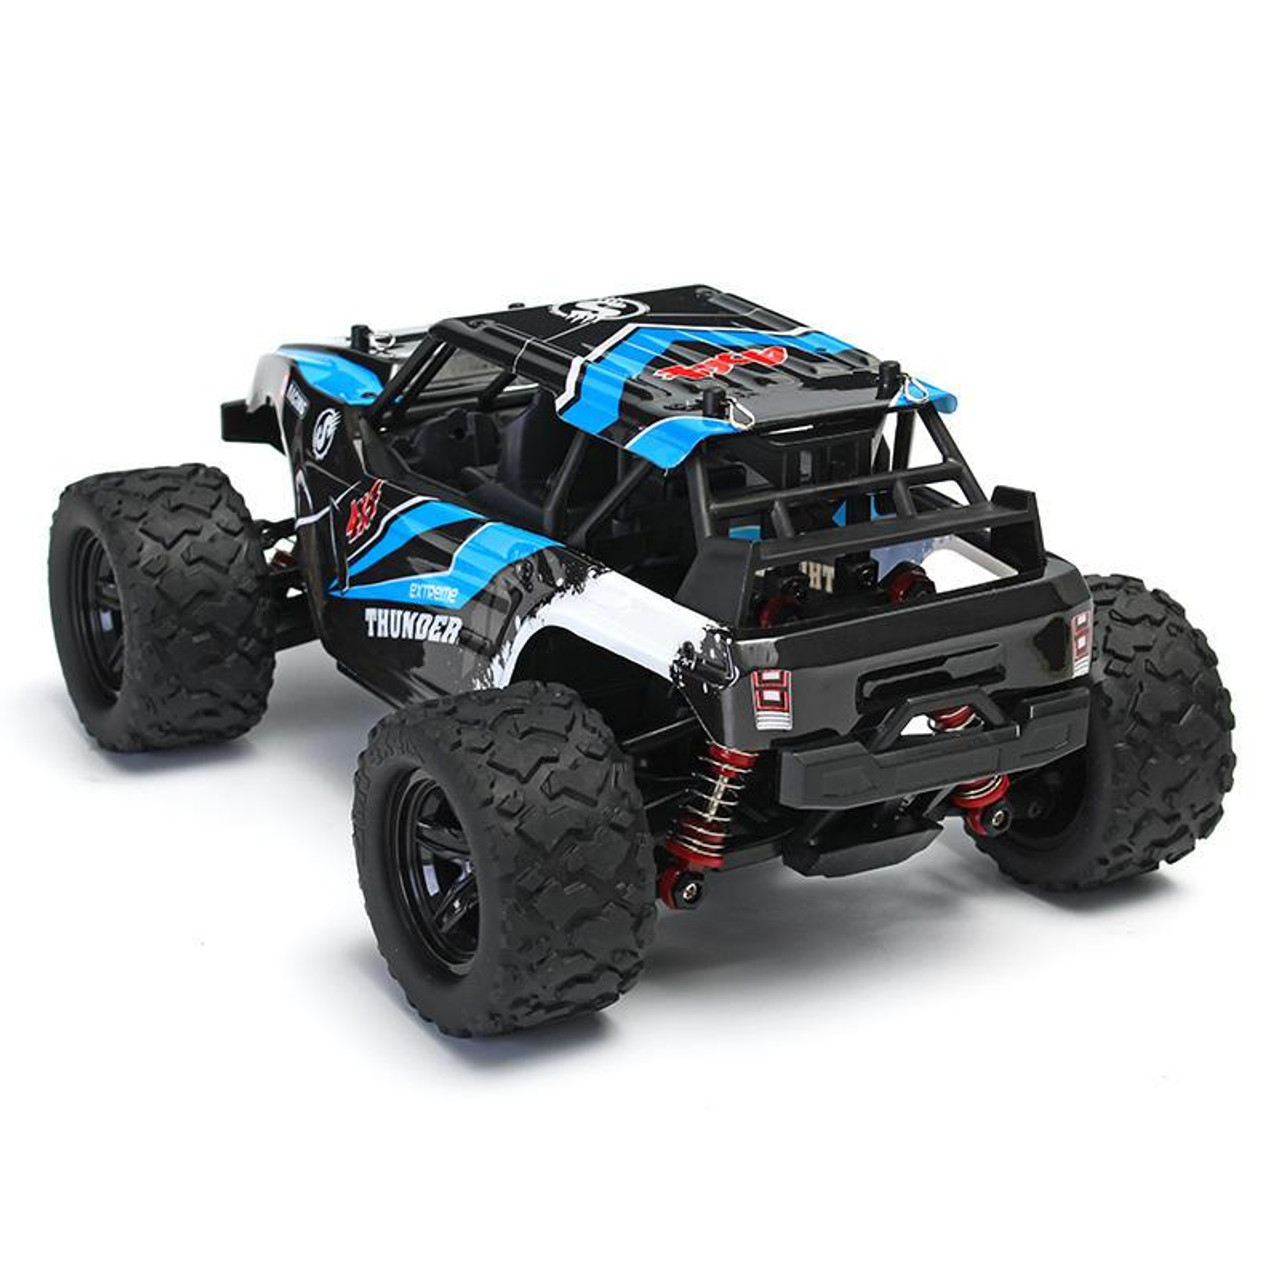 HAIBOXING RC Cars,1:18 36 KM/H High Speed Remote Control Cars for